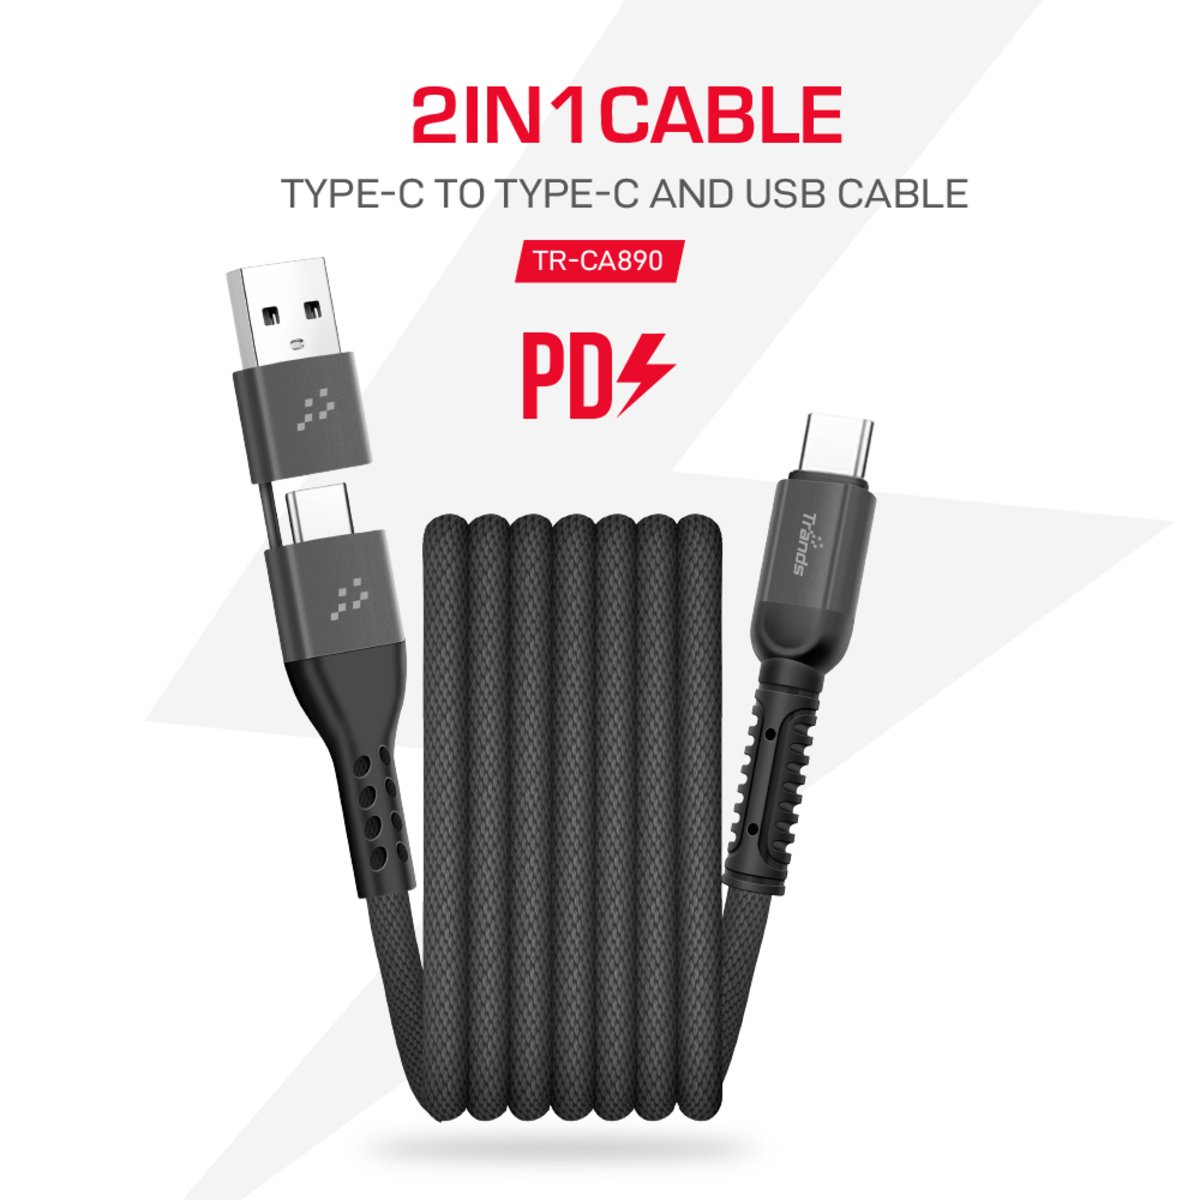 Trands 2 In 1 Type-C to Type-C and USB Cable CA890